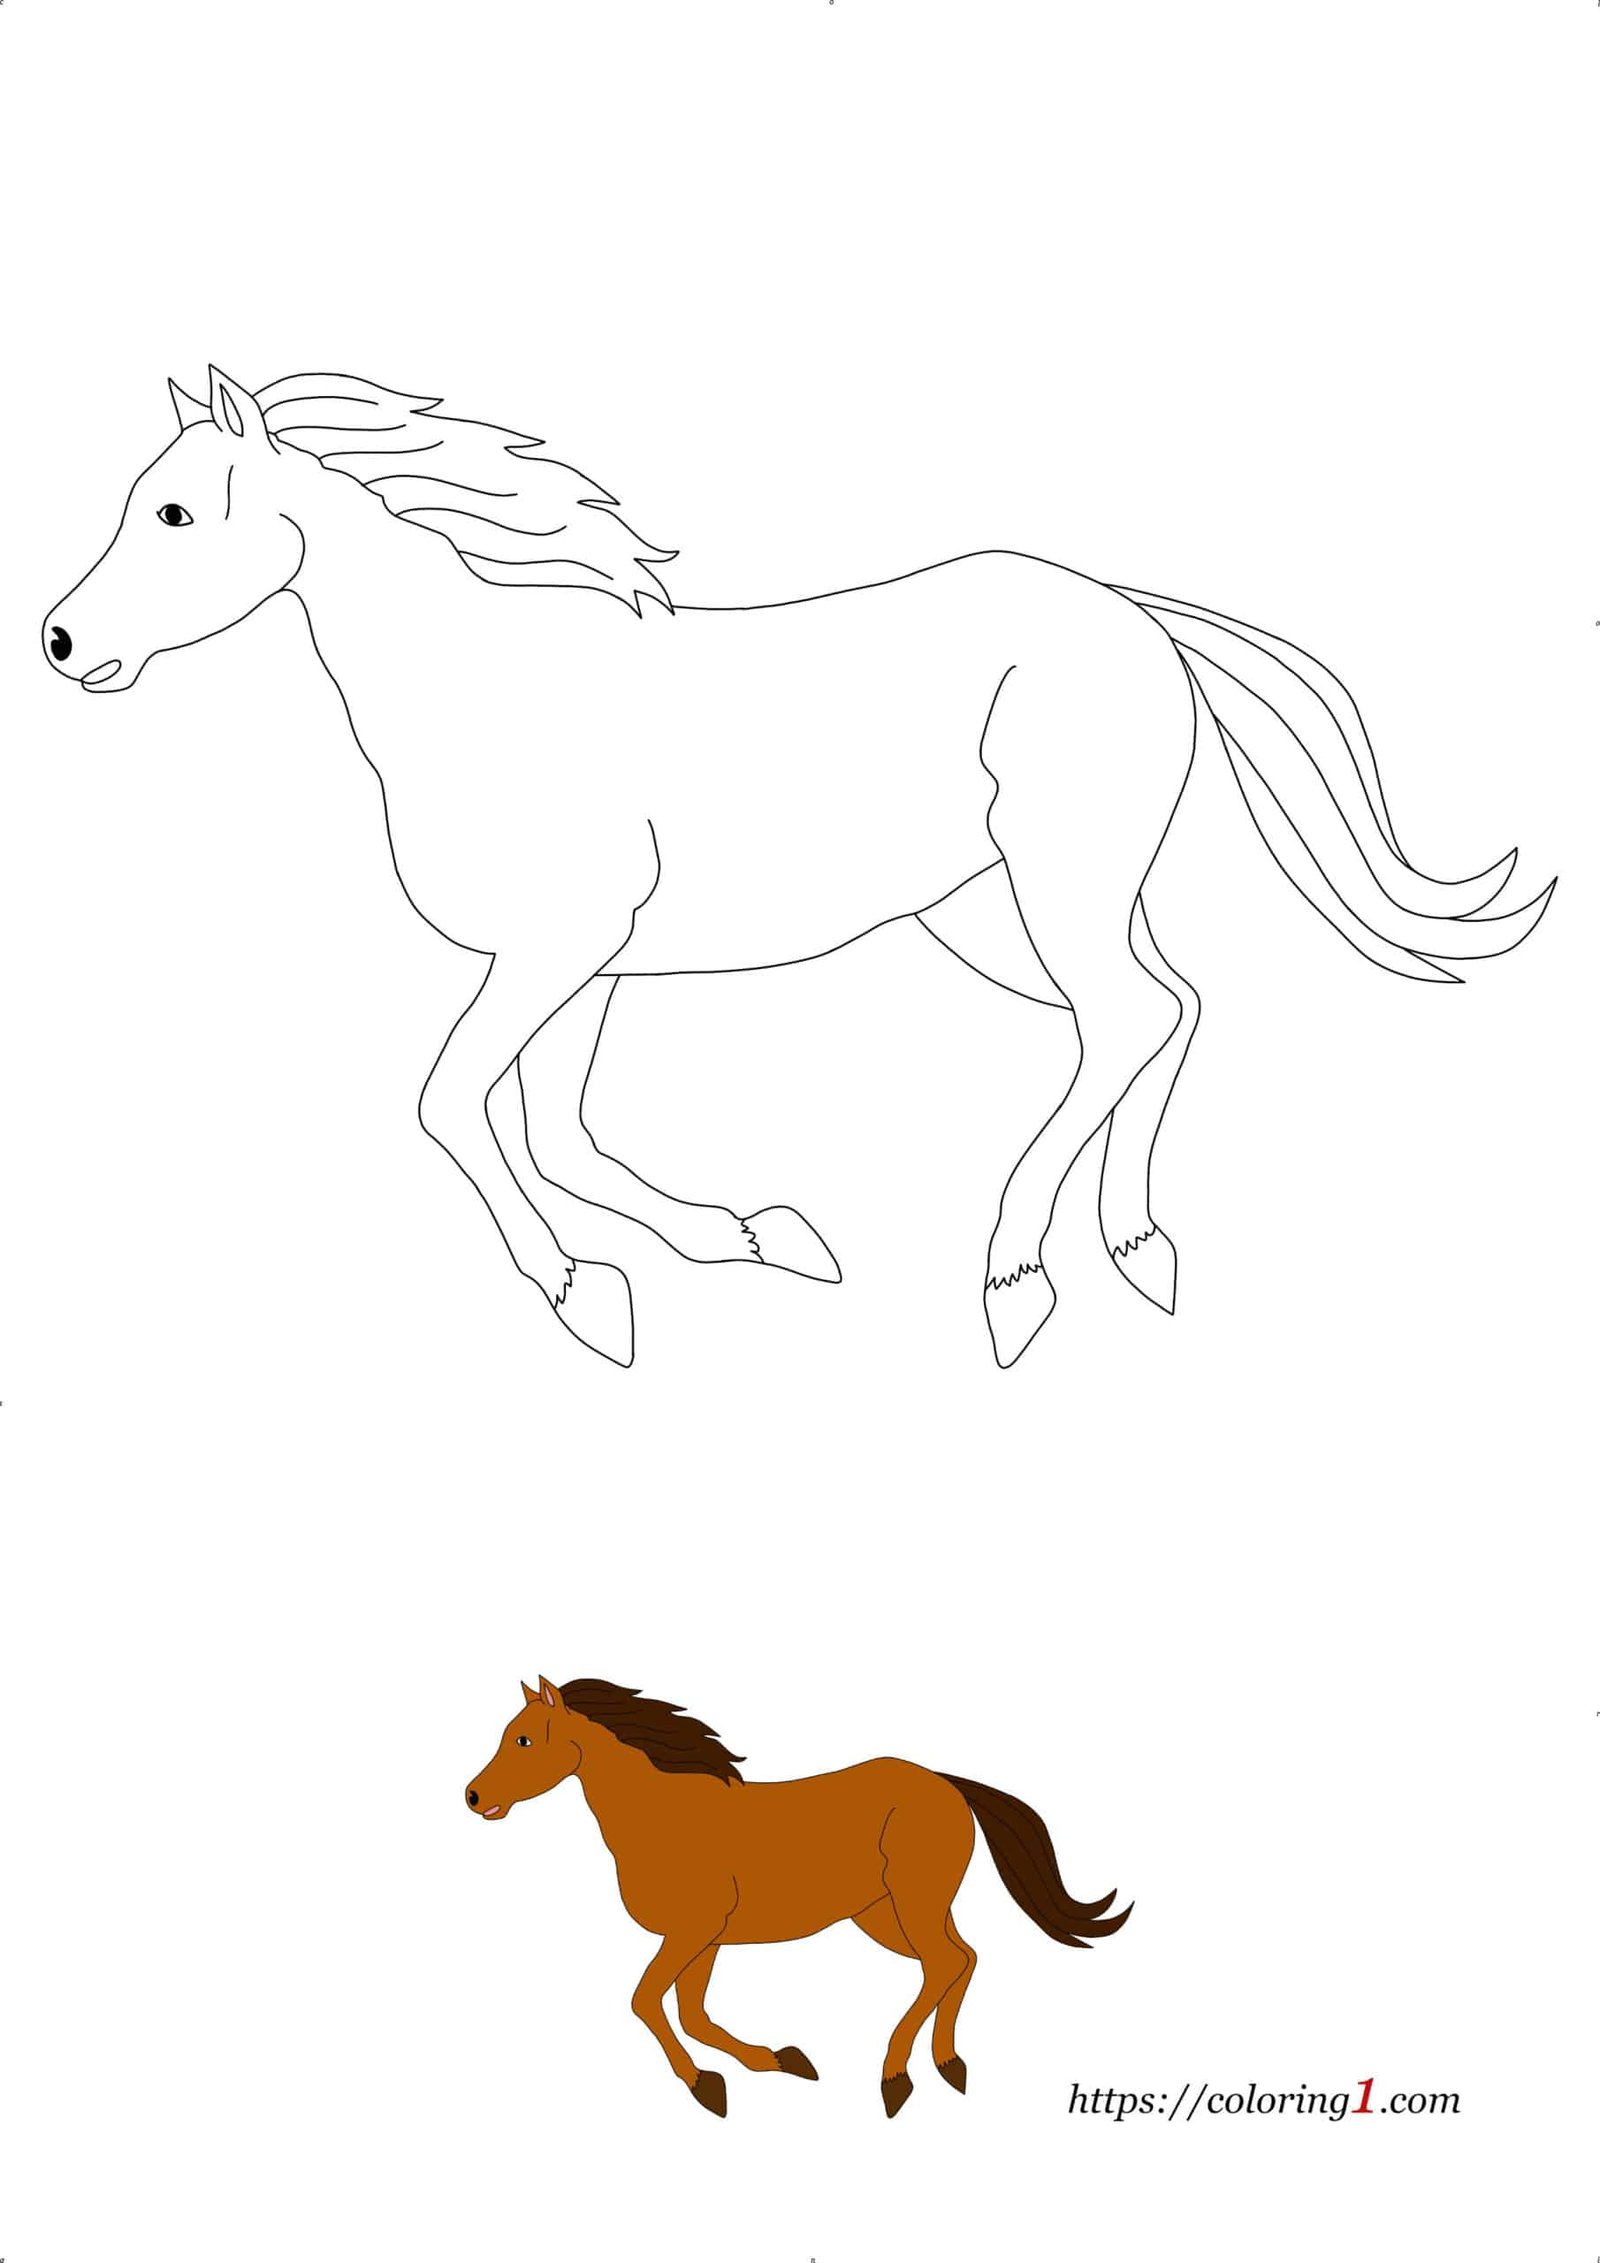 Realistic Horse easy coloring book page to print